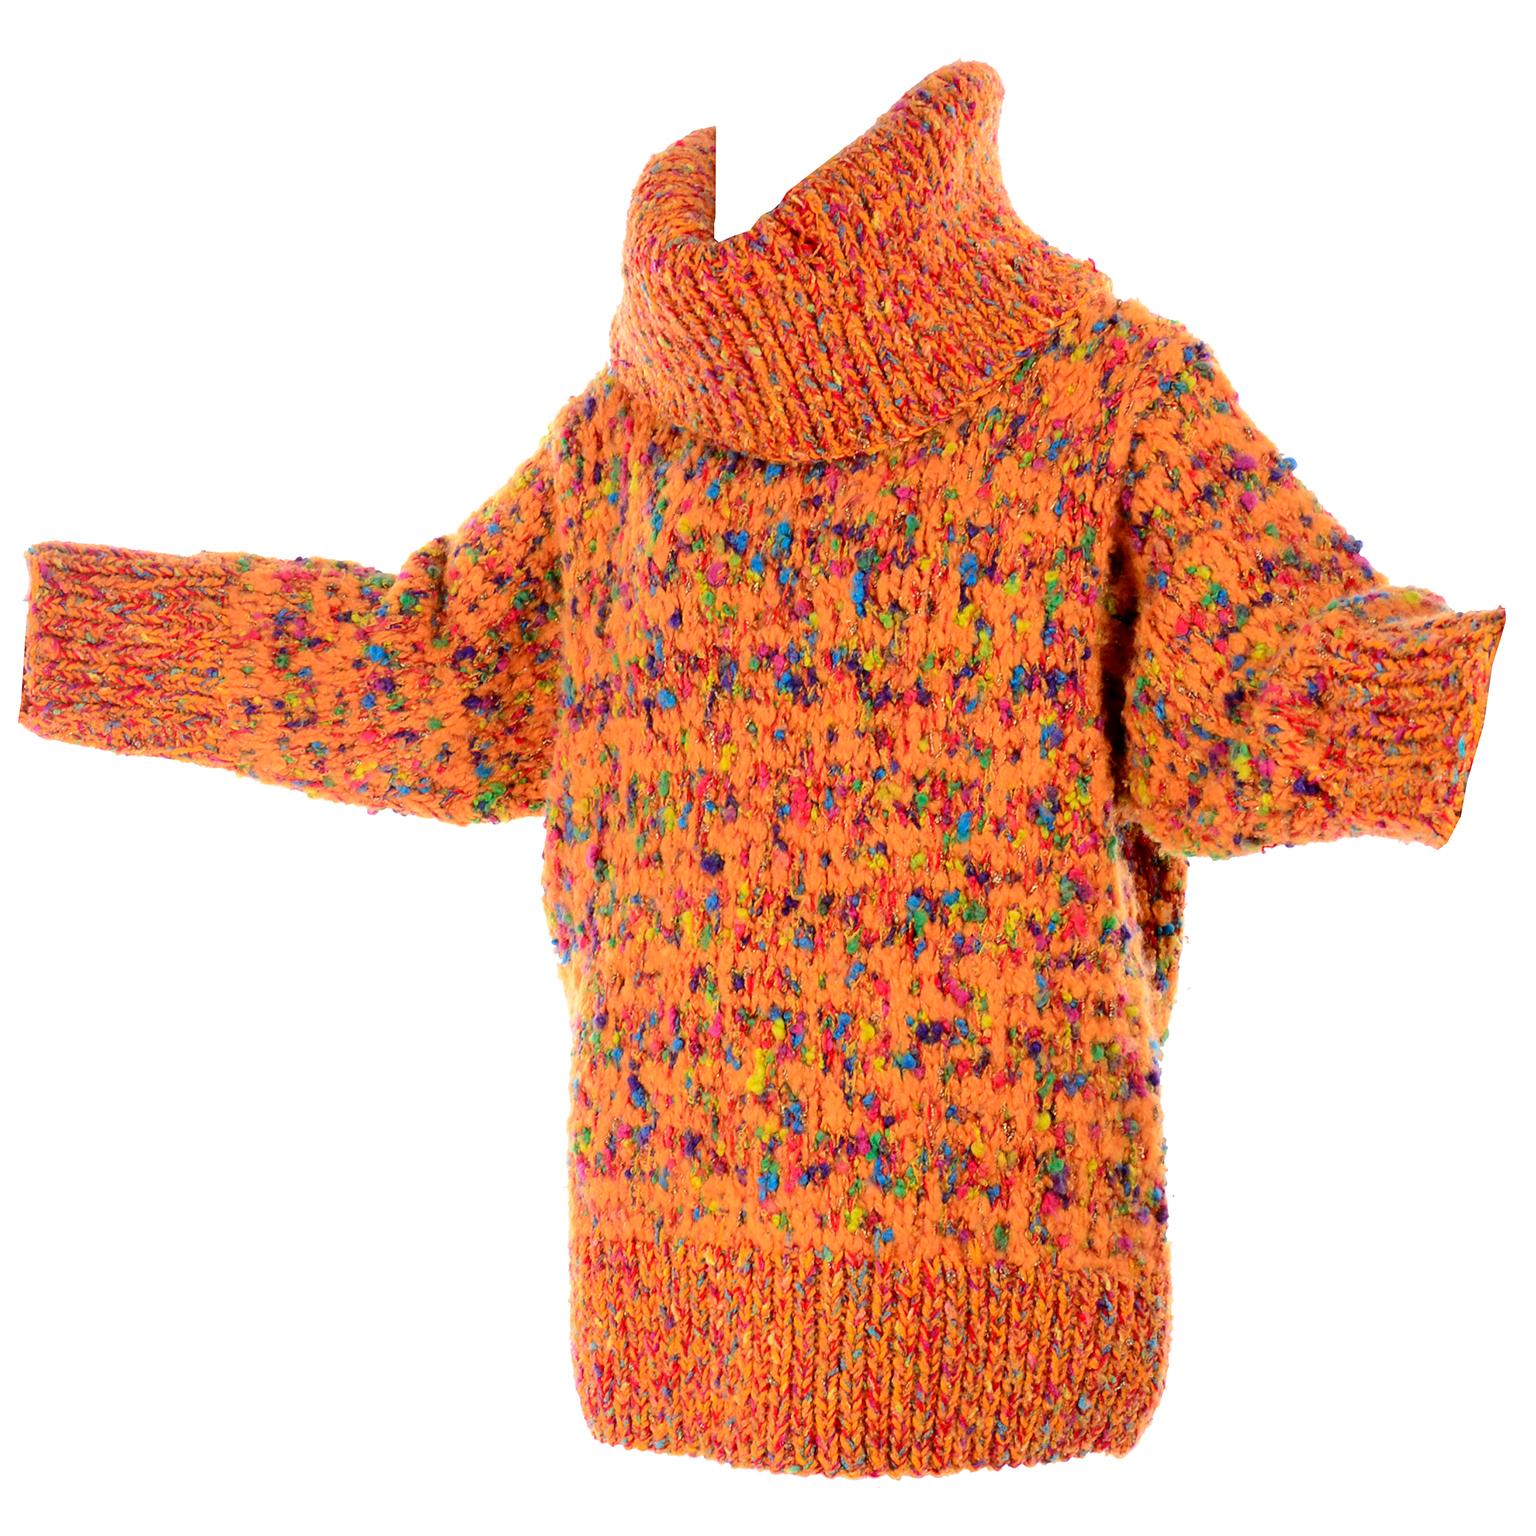 1980s Dramatic Oversized Vintage Sweater in Colorful Mohair Blend by Anne Klein